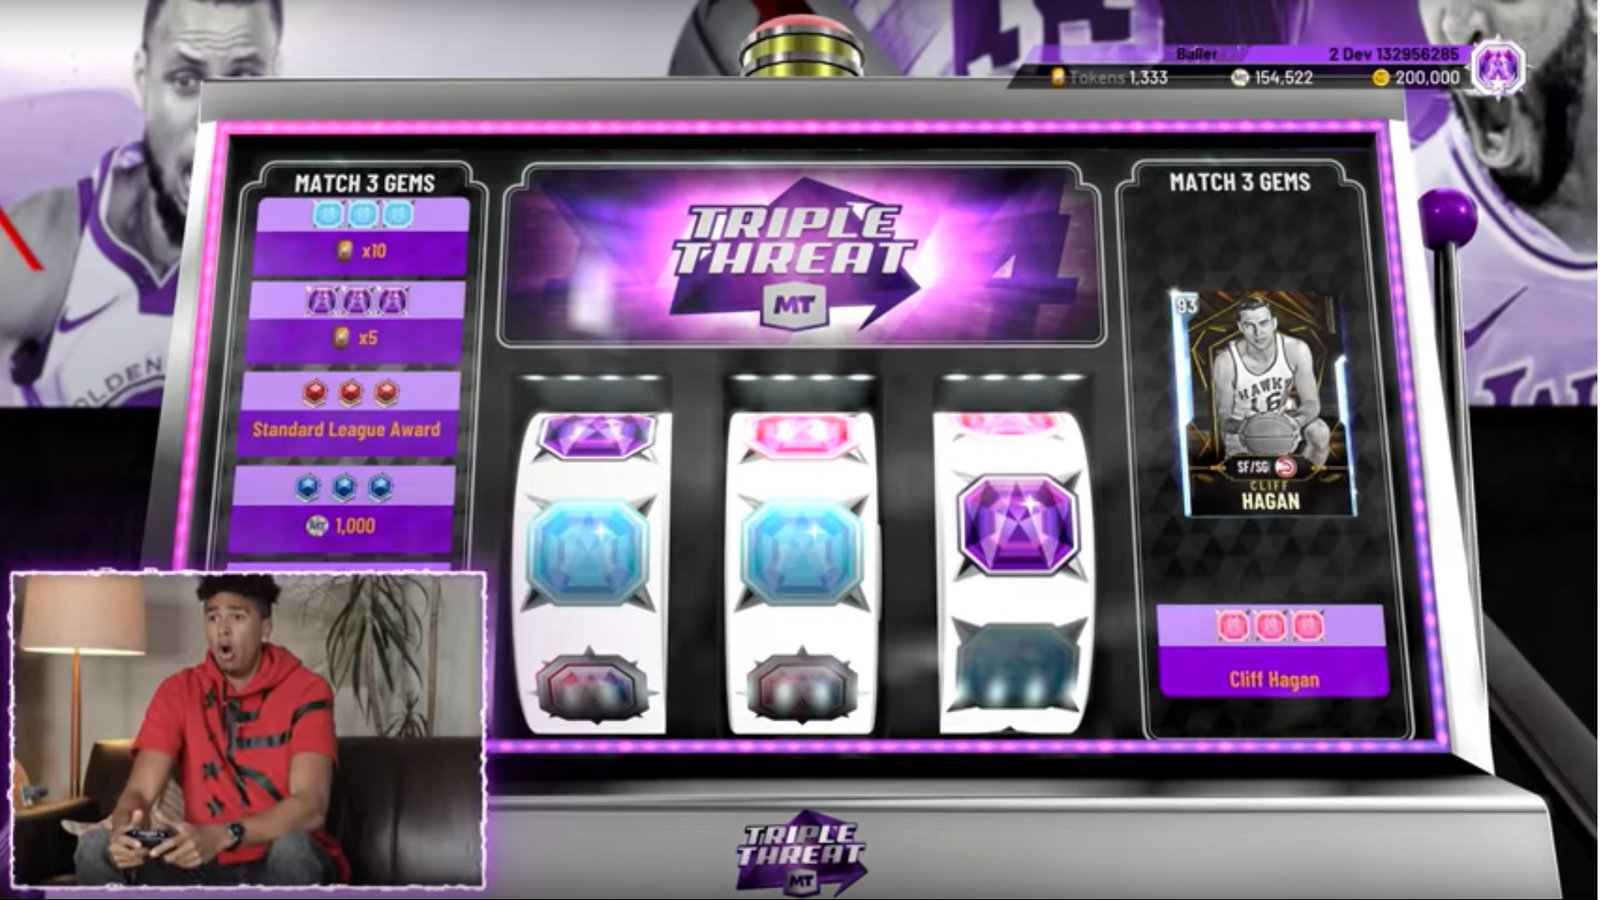 Gambling Simulator NBA 2K20 Gets Absolutely Trashed on Steam